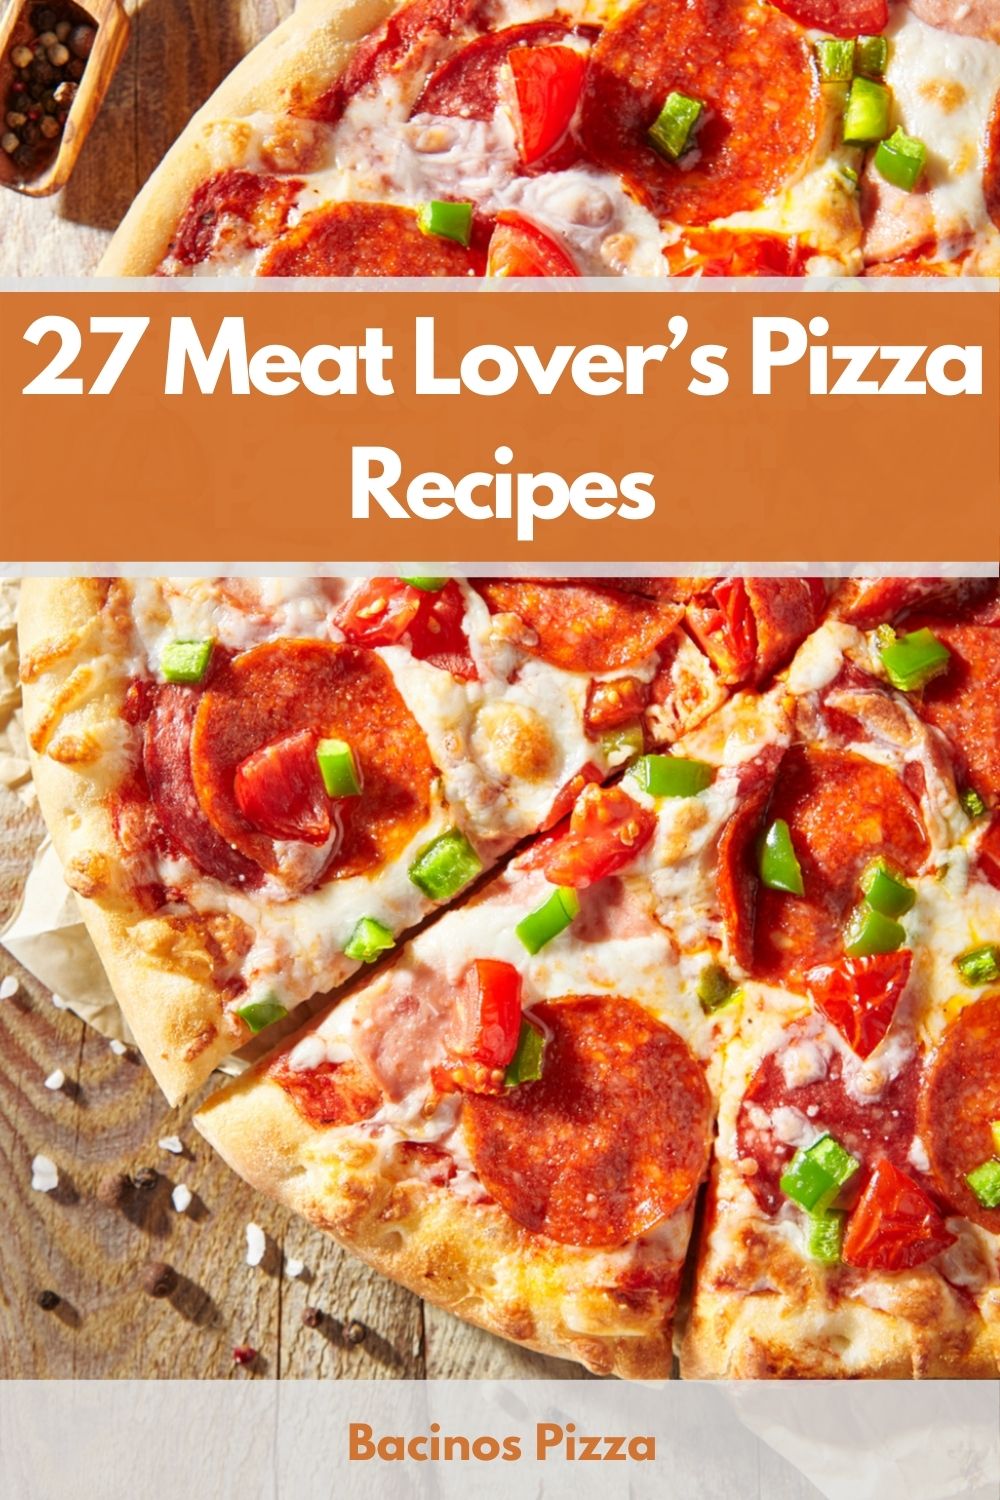 27 Meat Lover’s Pizza Recipes pin